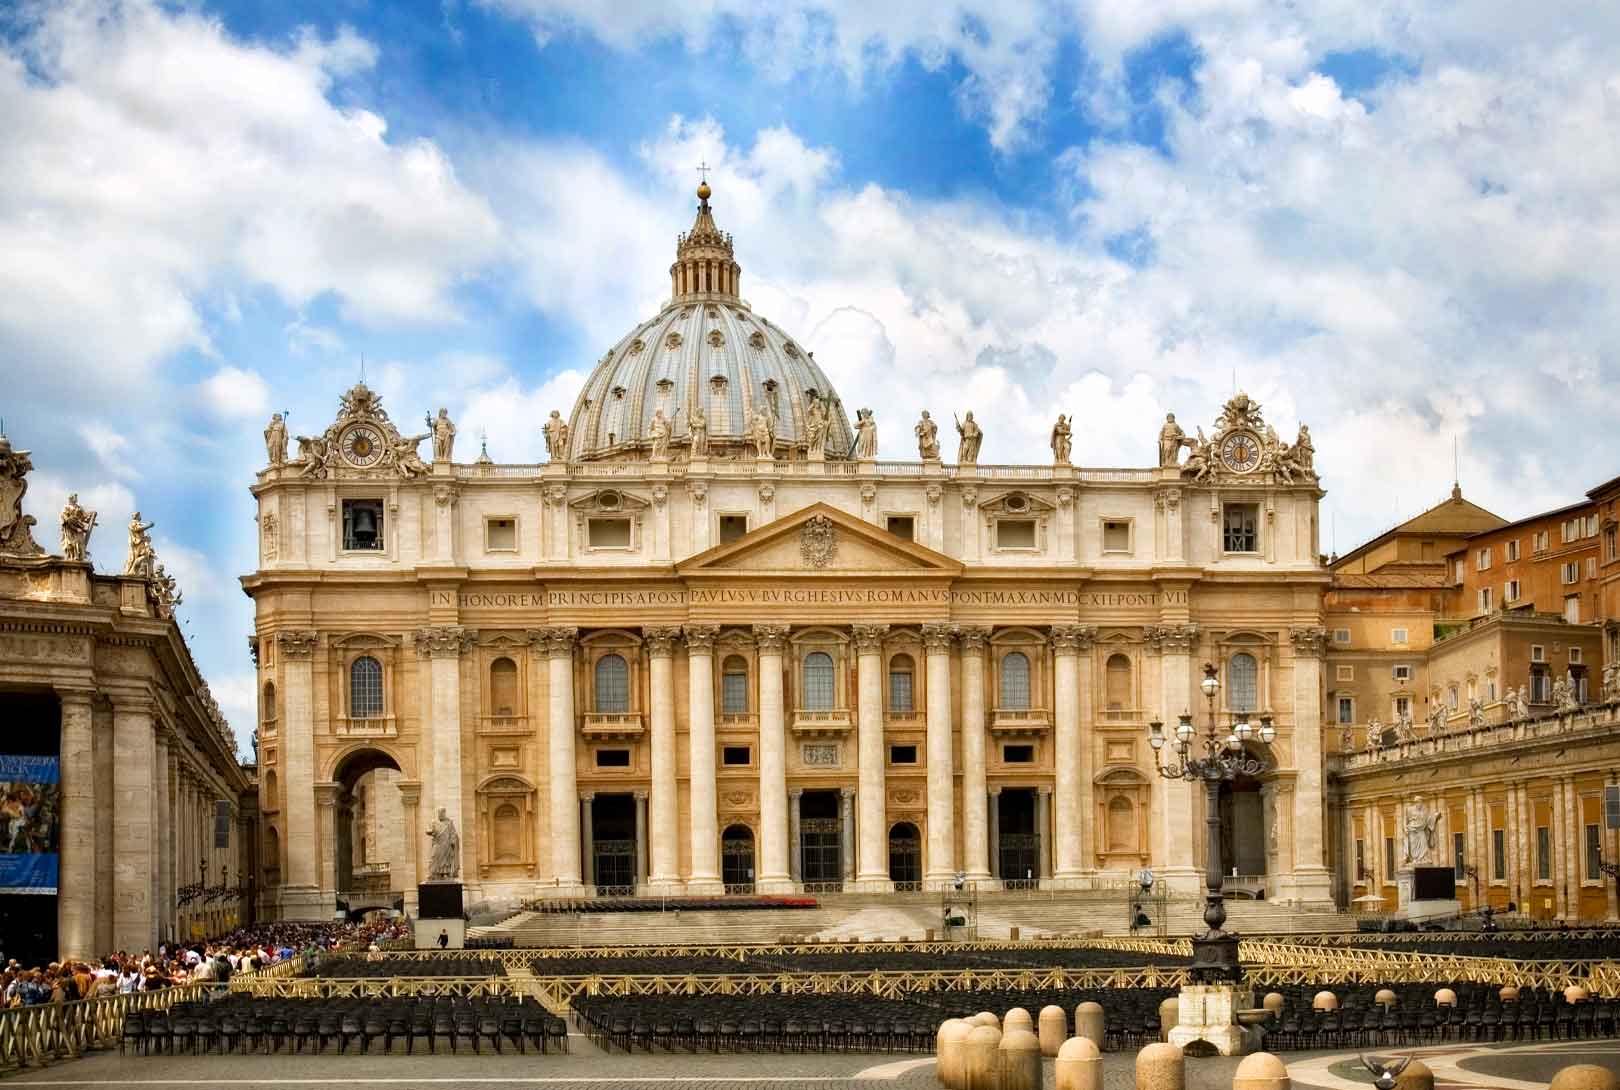 photo of the front of St. Peter's Basilica